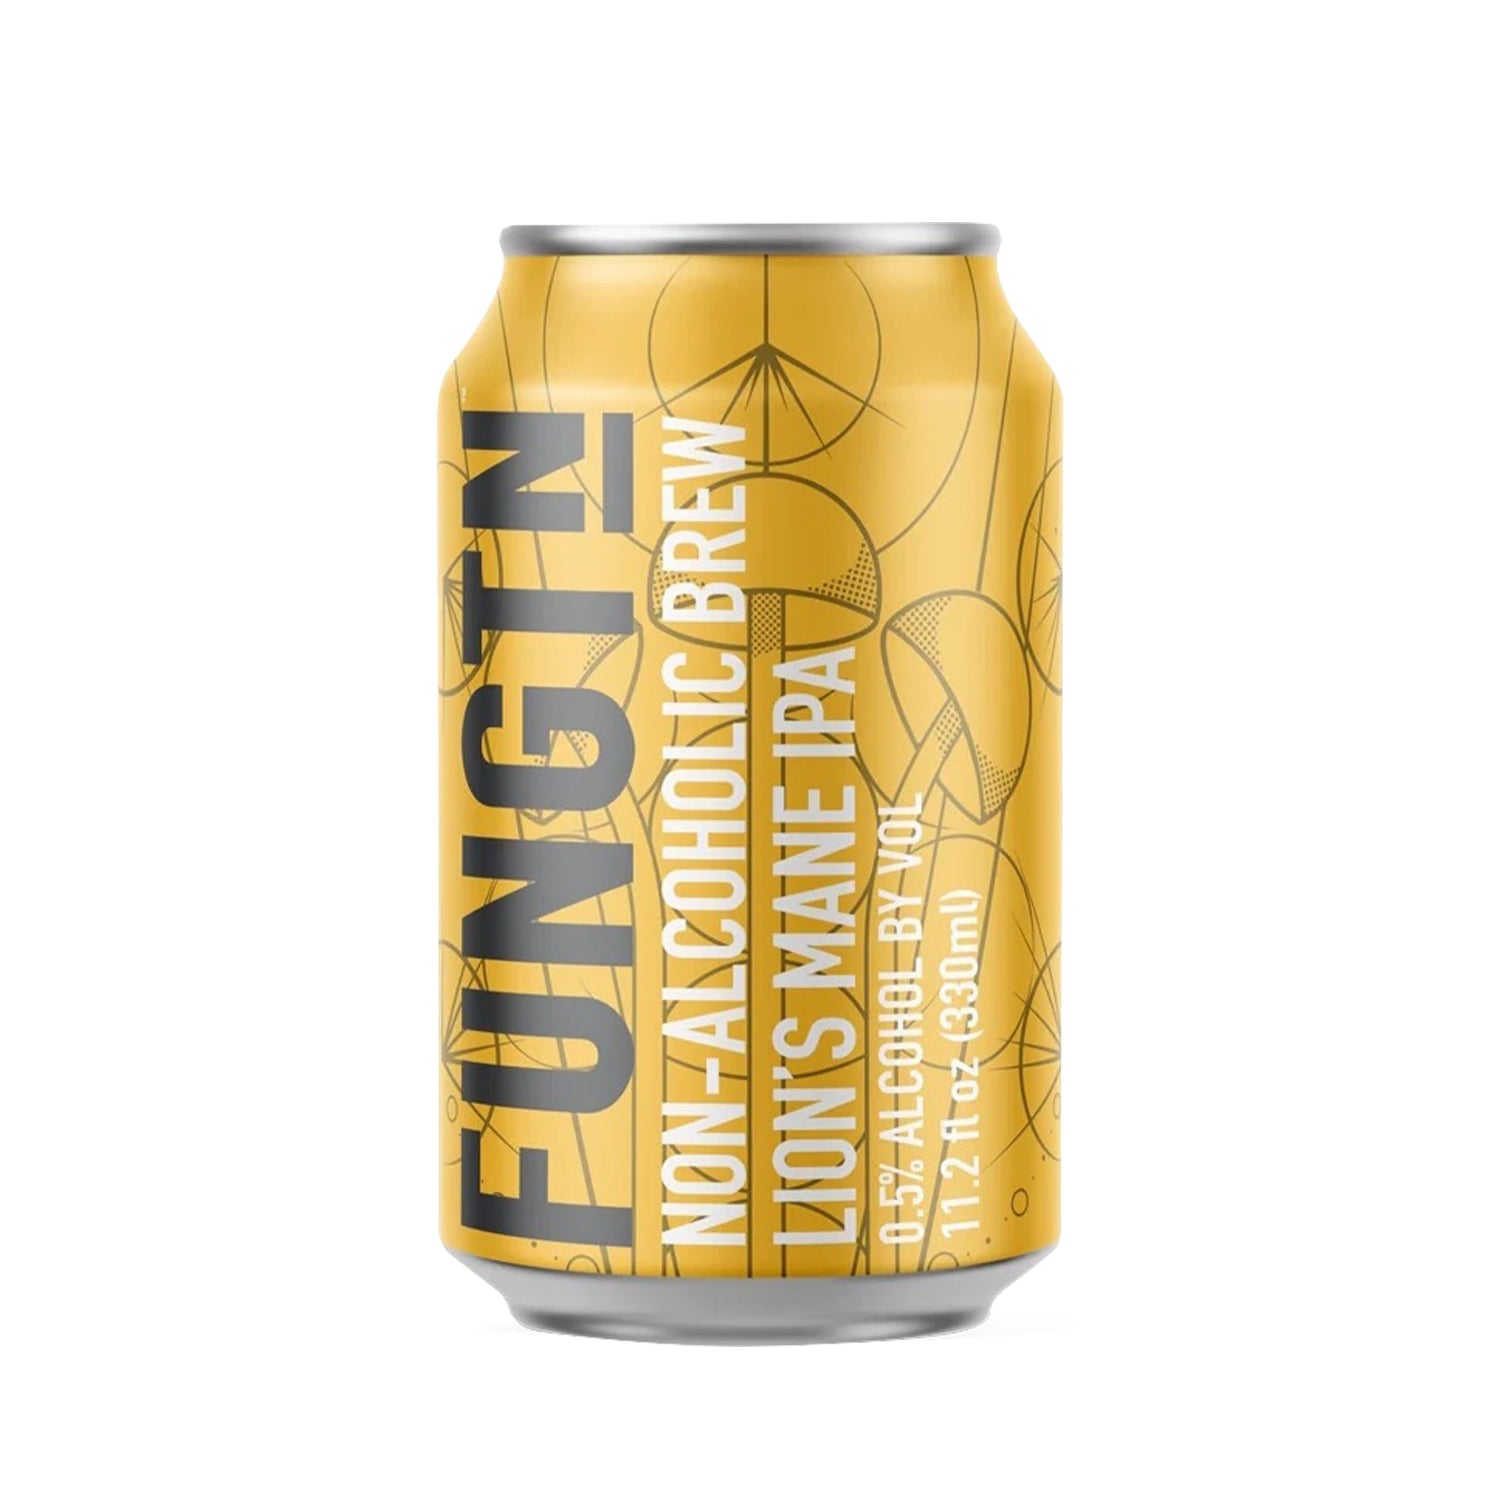 Fungtn Lion's Mane IPA - Non-Alcoholic Beer (6-Pack)